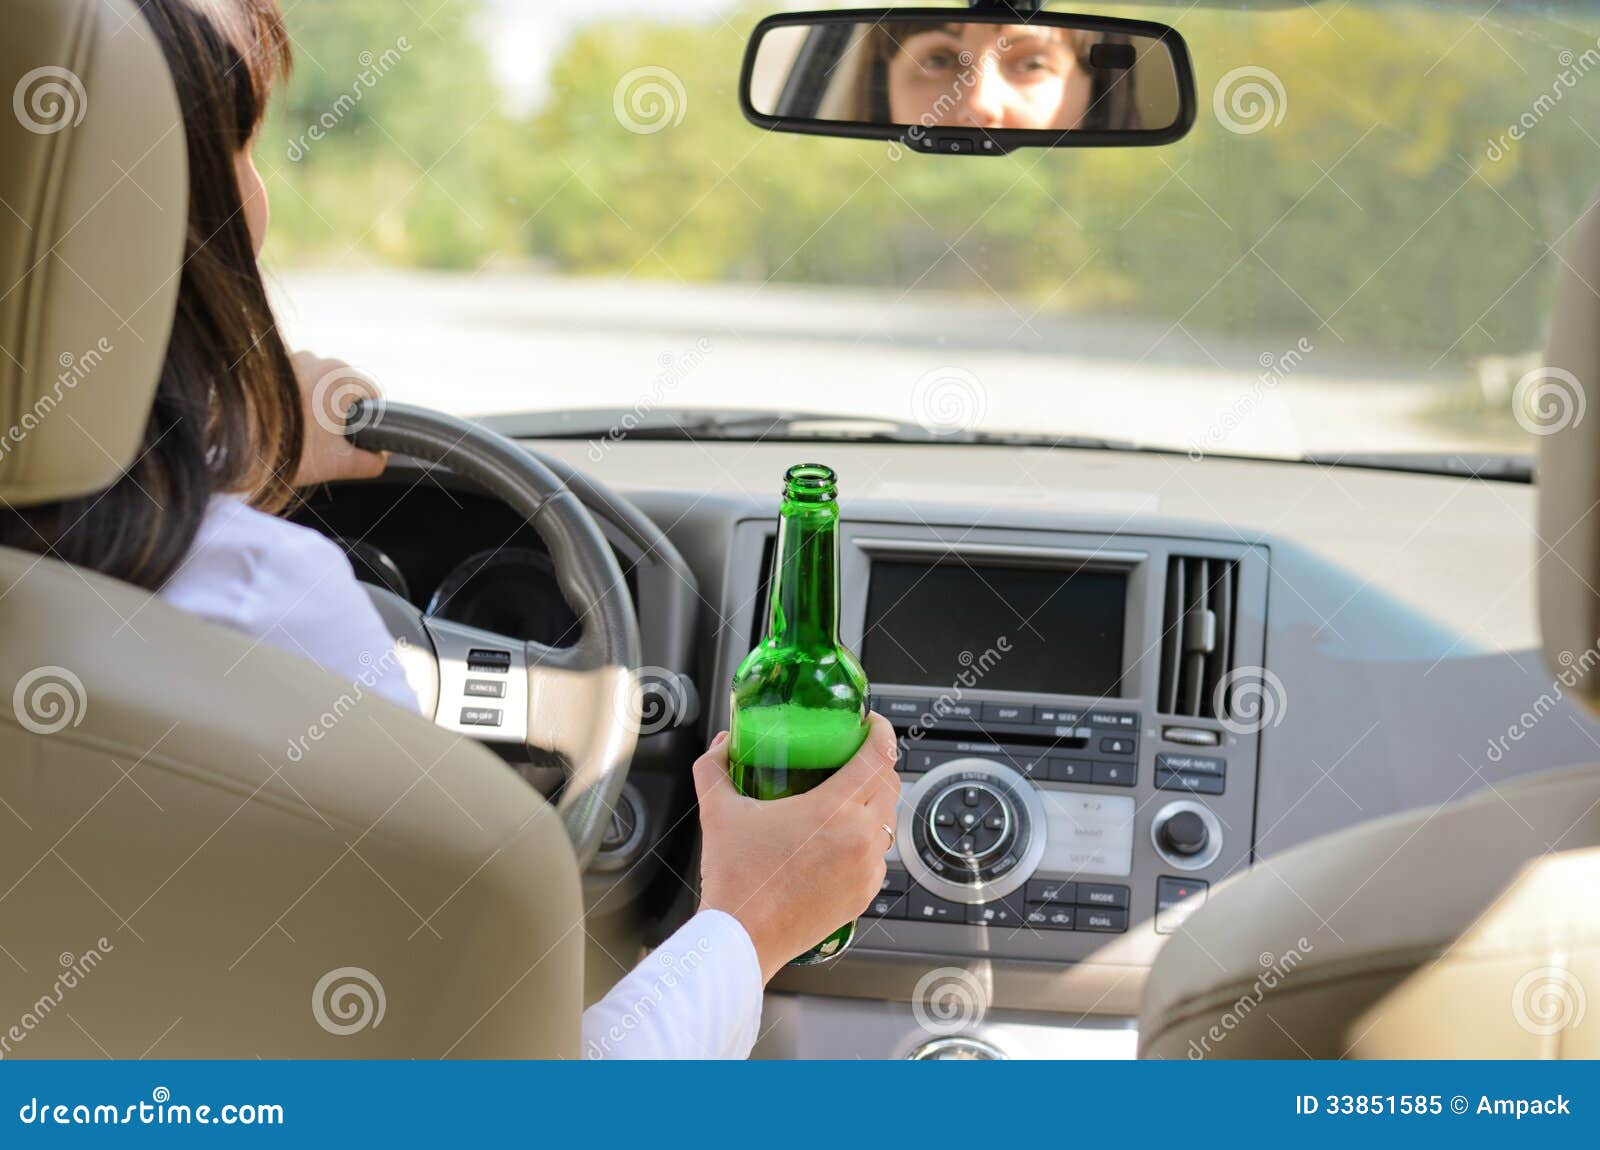 Woman Drinking Alcohol And Driving Stock Image - Image of behind, automobile: 33851585